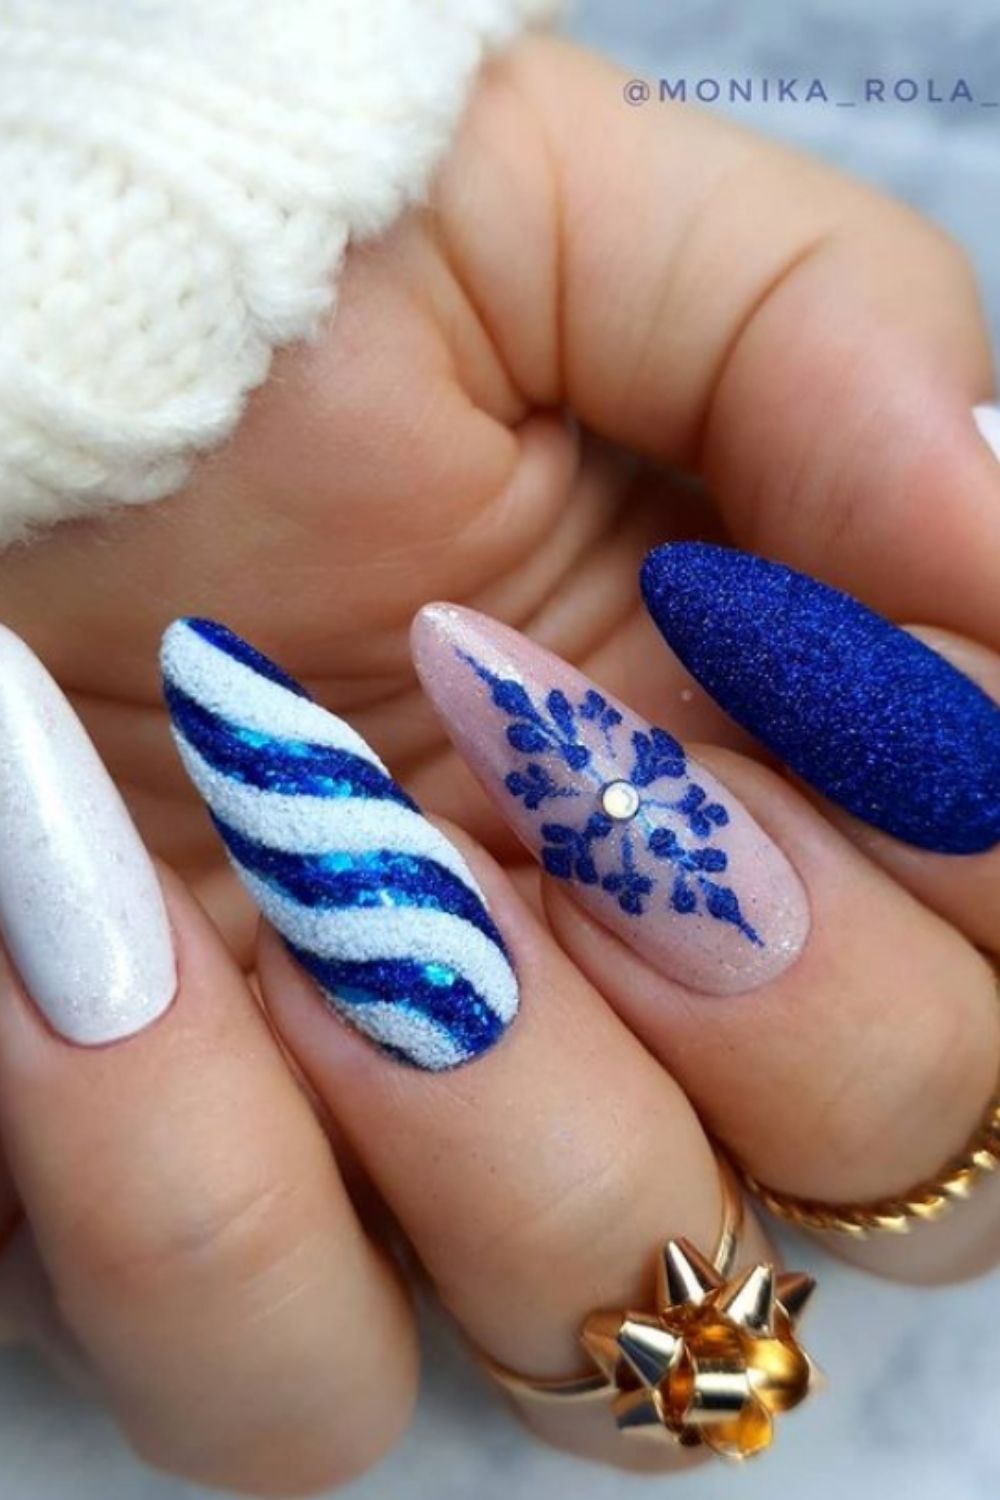 White and blue almond nails